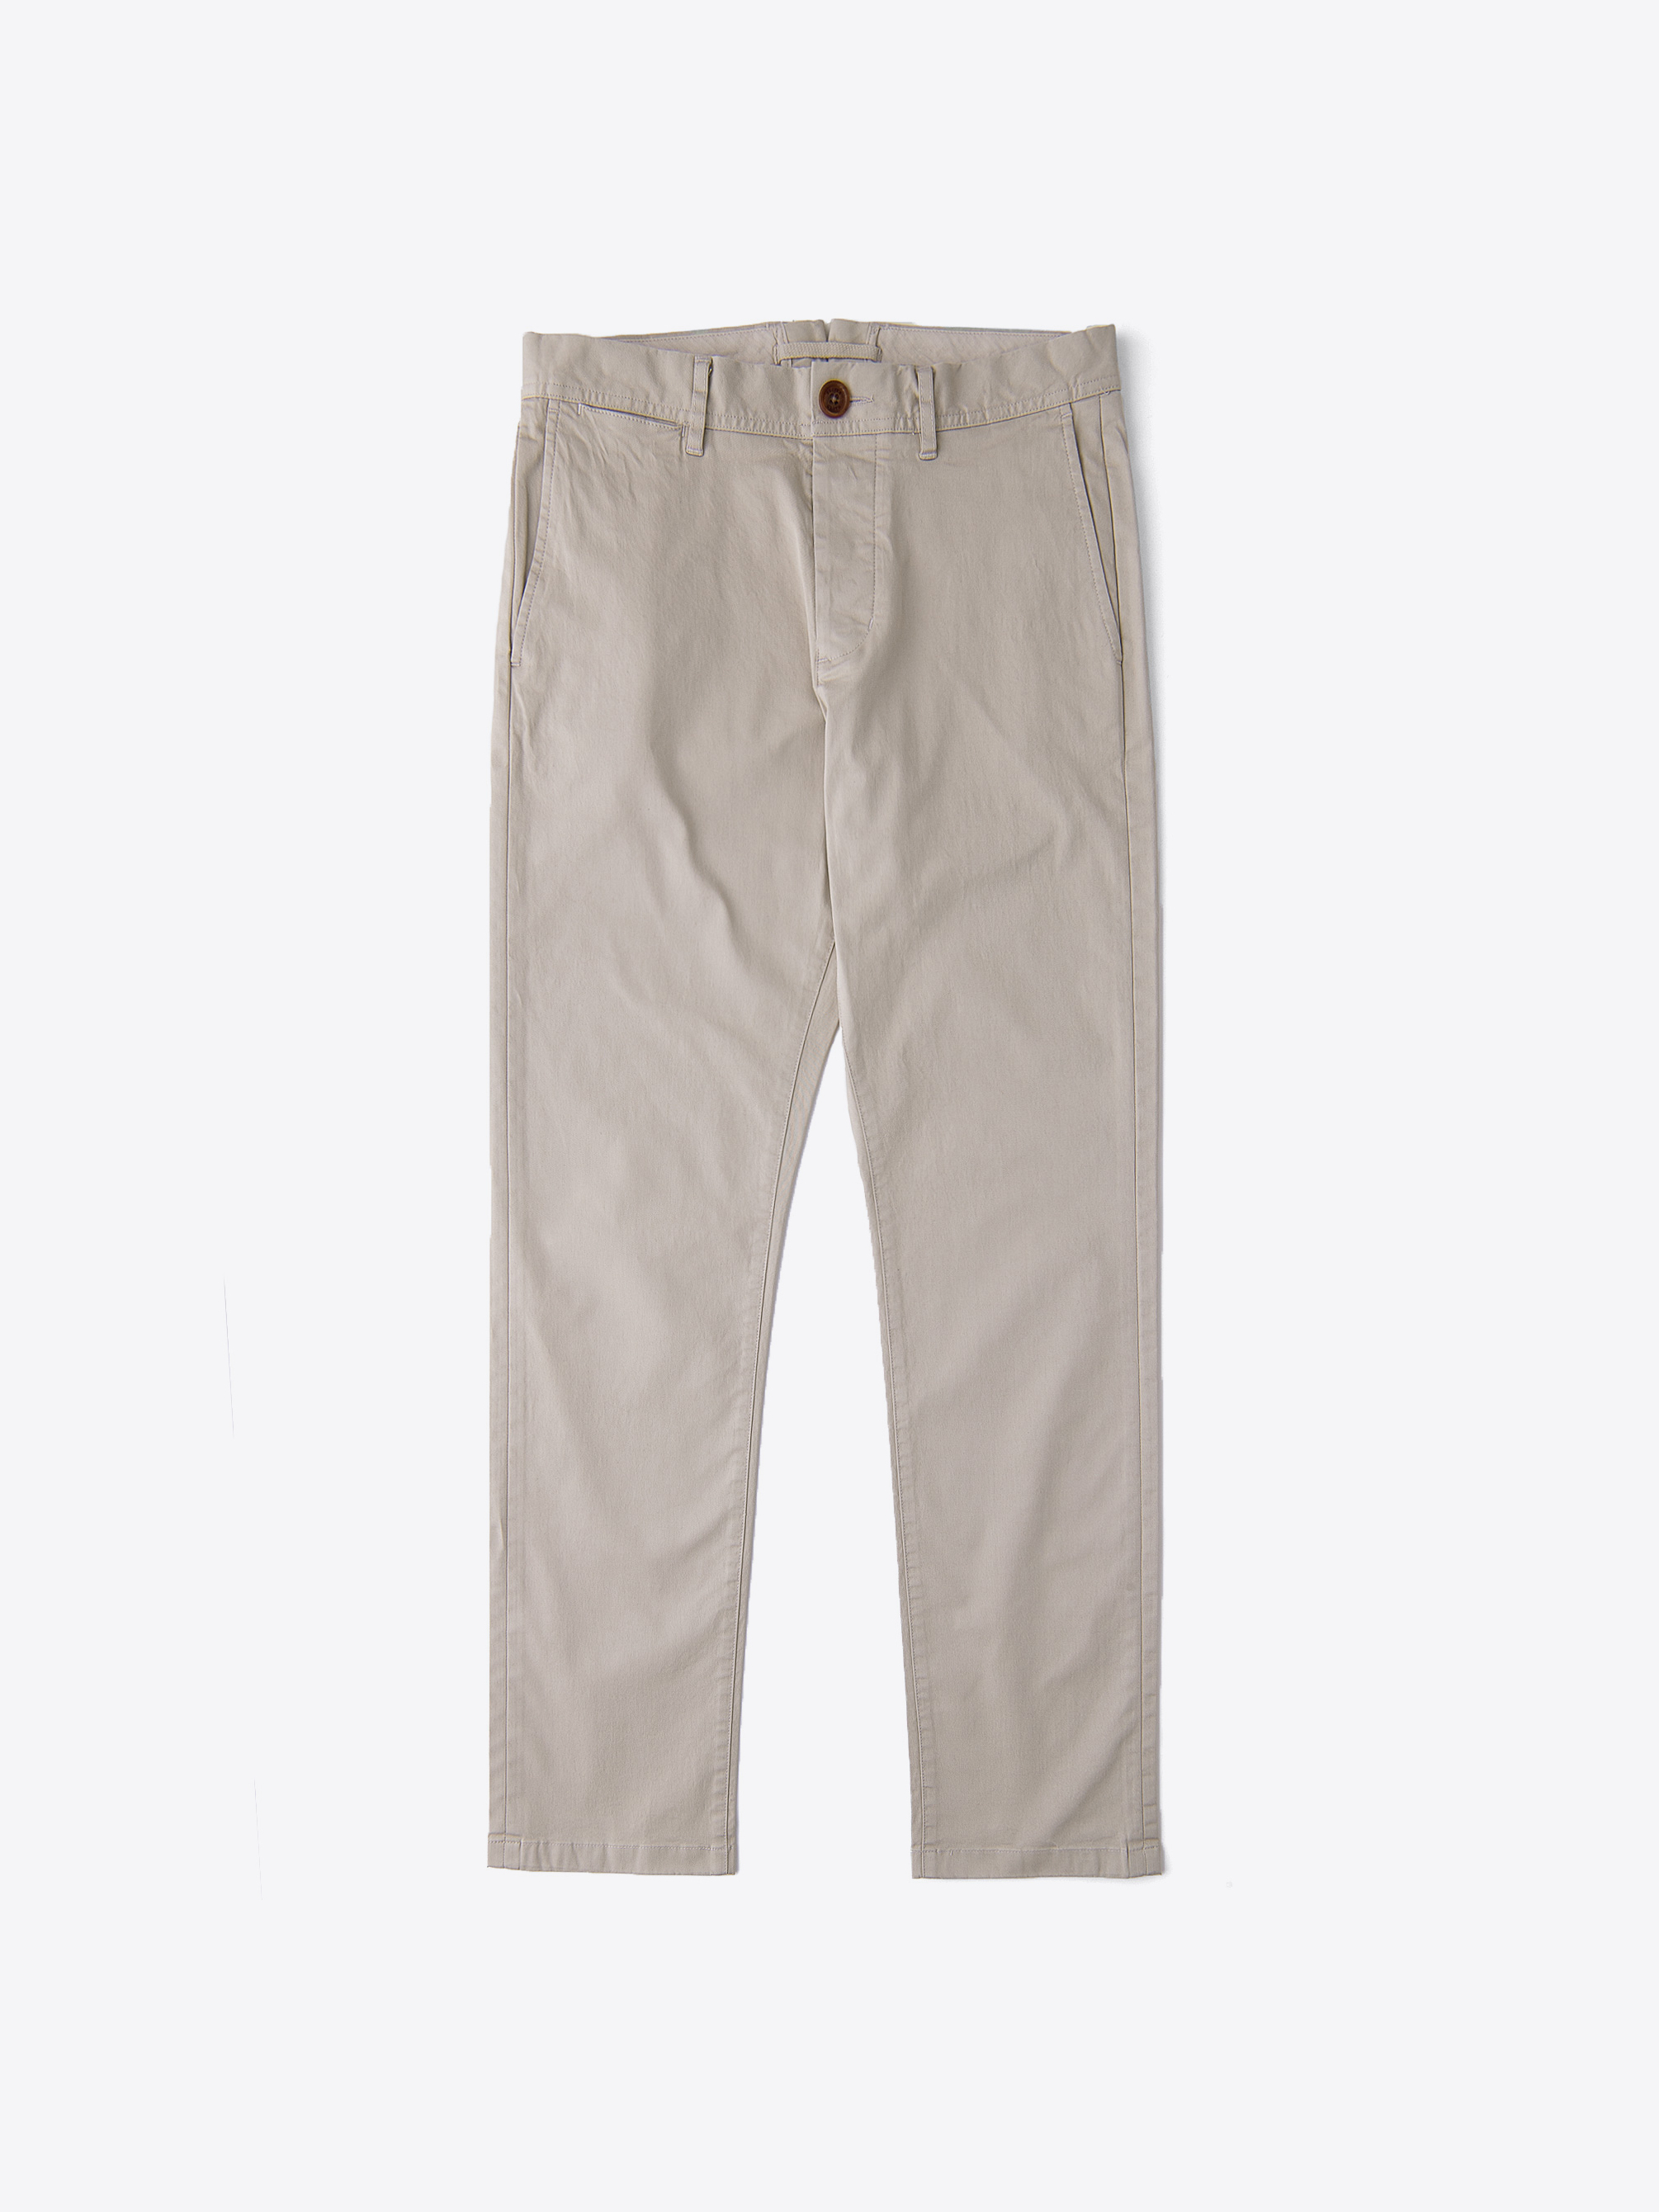 Zoom Image of Bowery Beige Stretch Cotton Chino